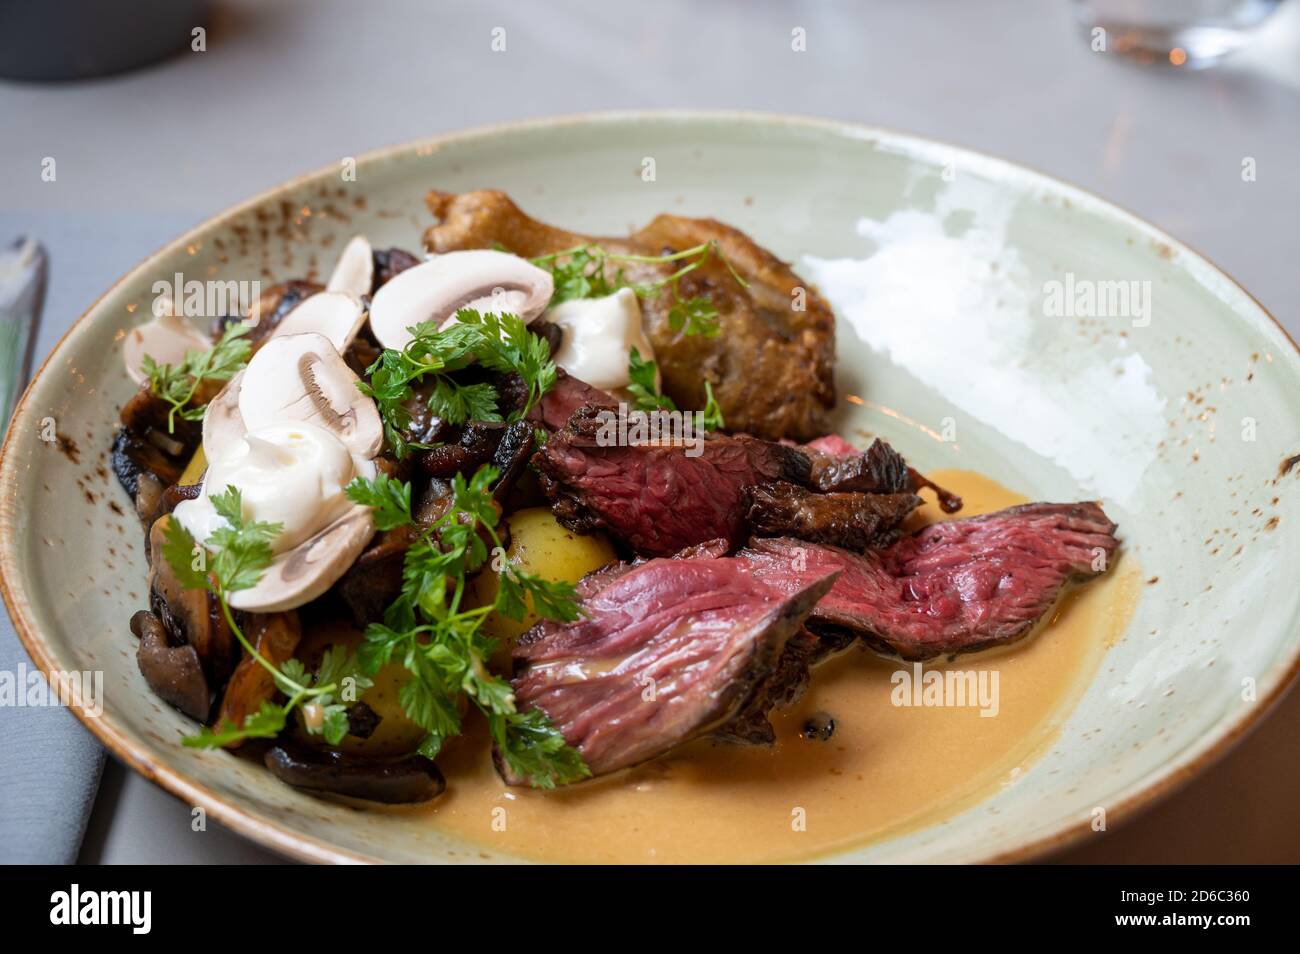 A meal based around butchers steak with mushrooms and tomatoes served in a gray rustic plate in restaurant setting Stock Photo